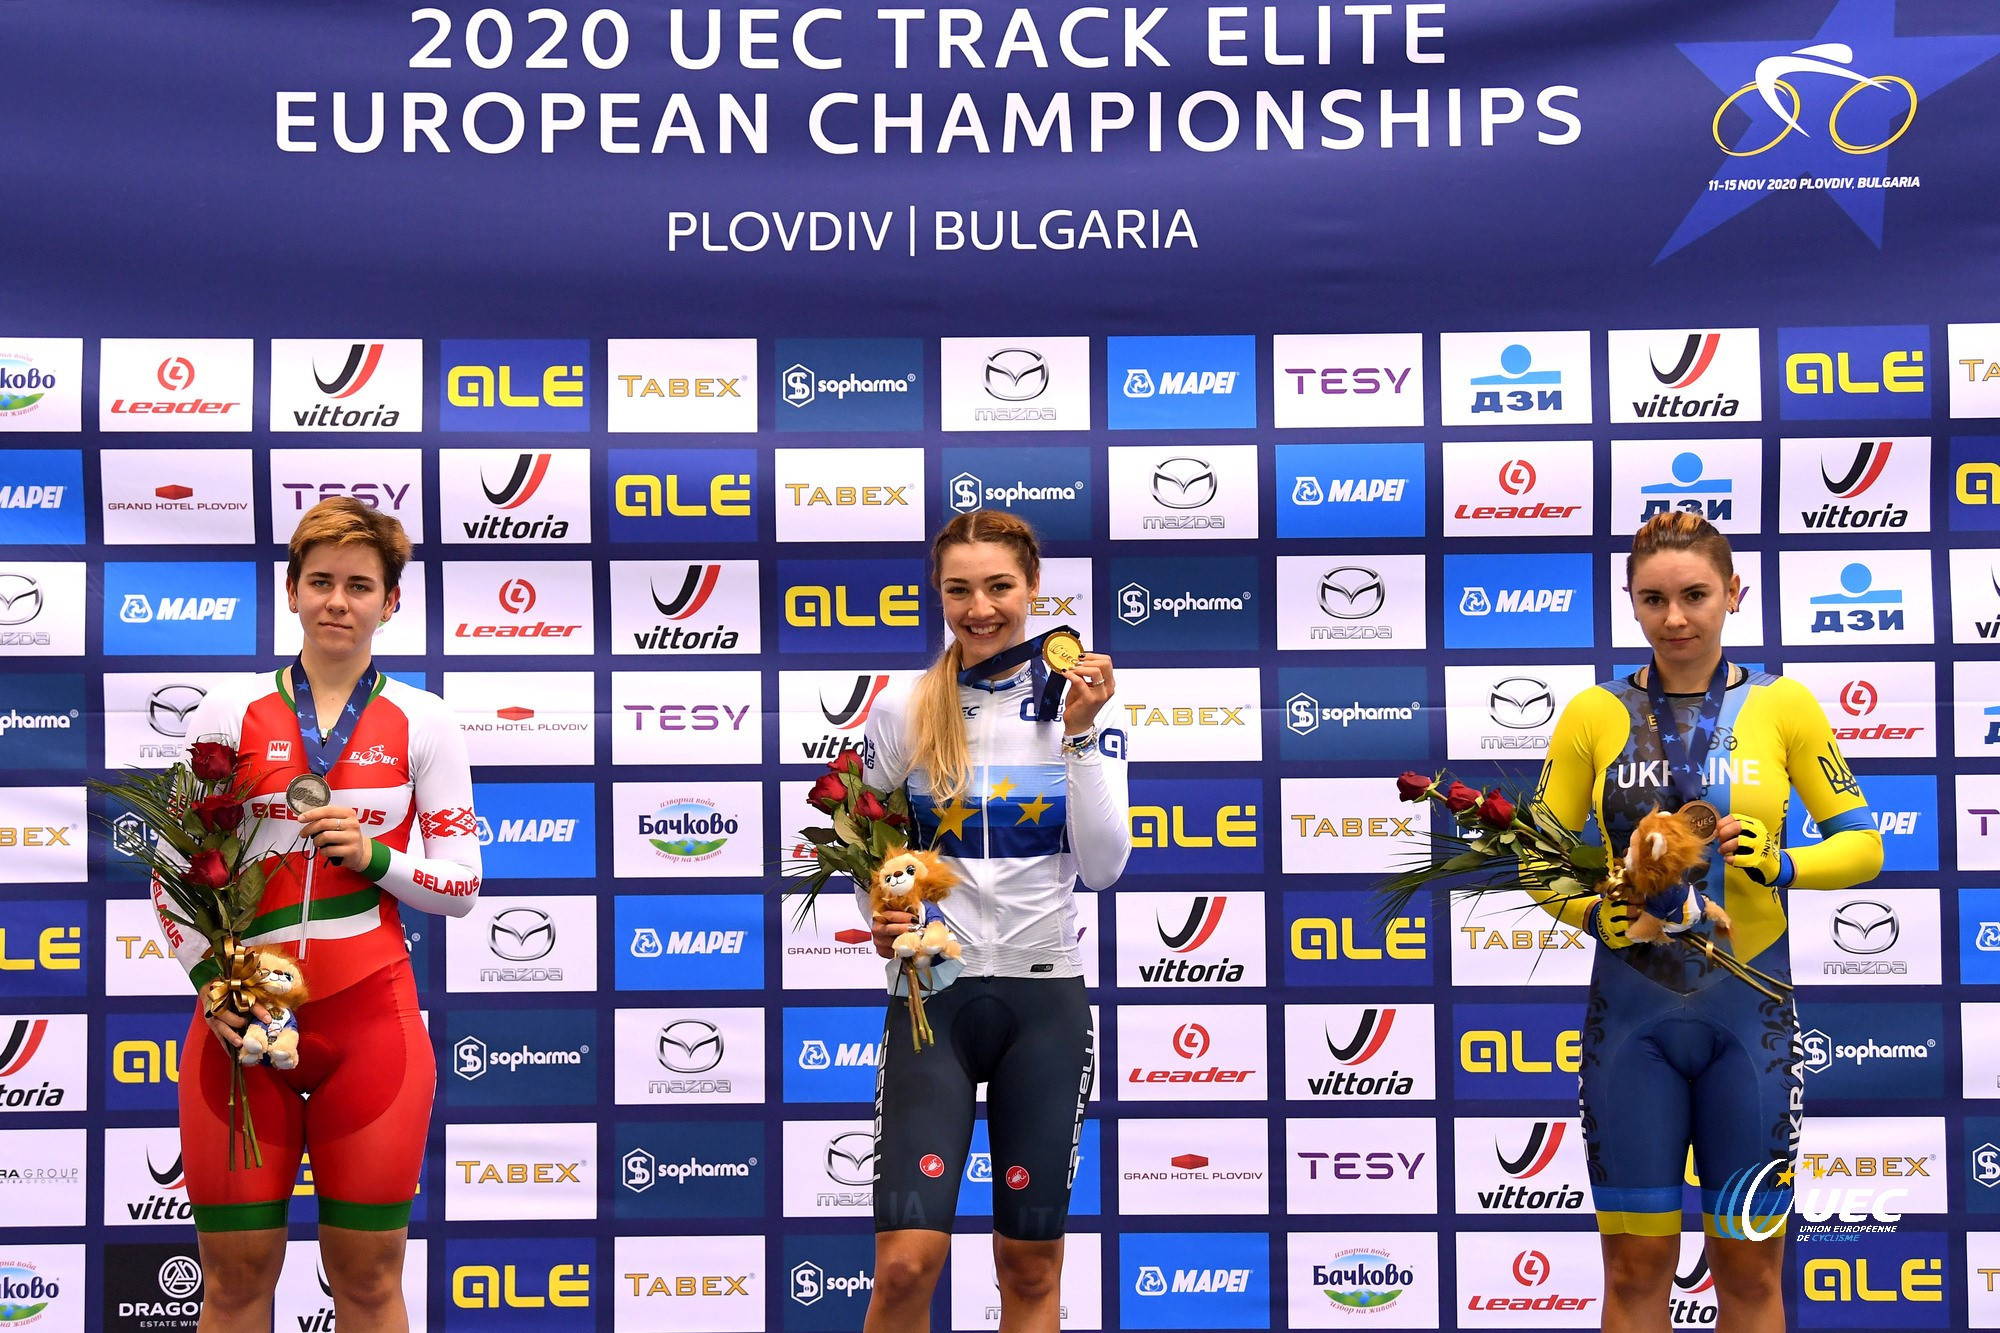 Russia take team sprint titles on opening day of UEC Elite Track European Championships